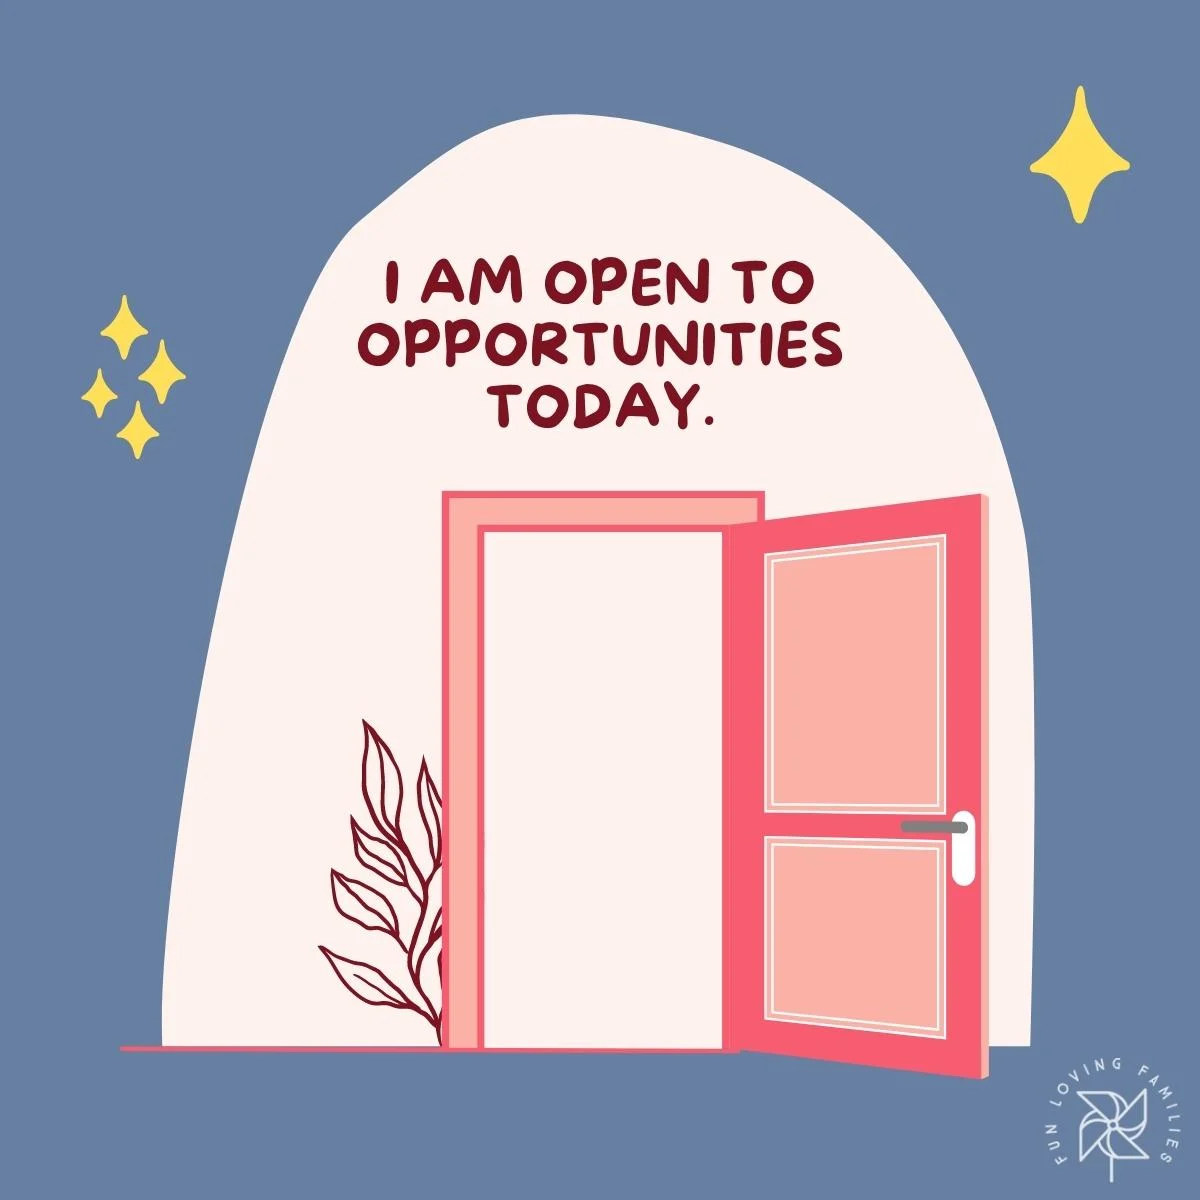 I am open to opportunities today affirmation.